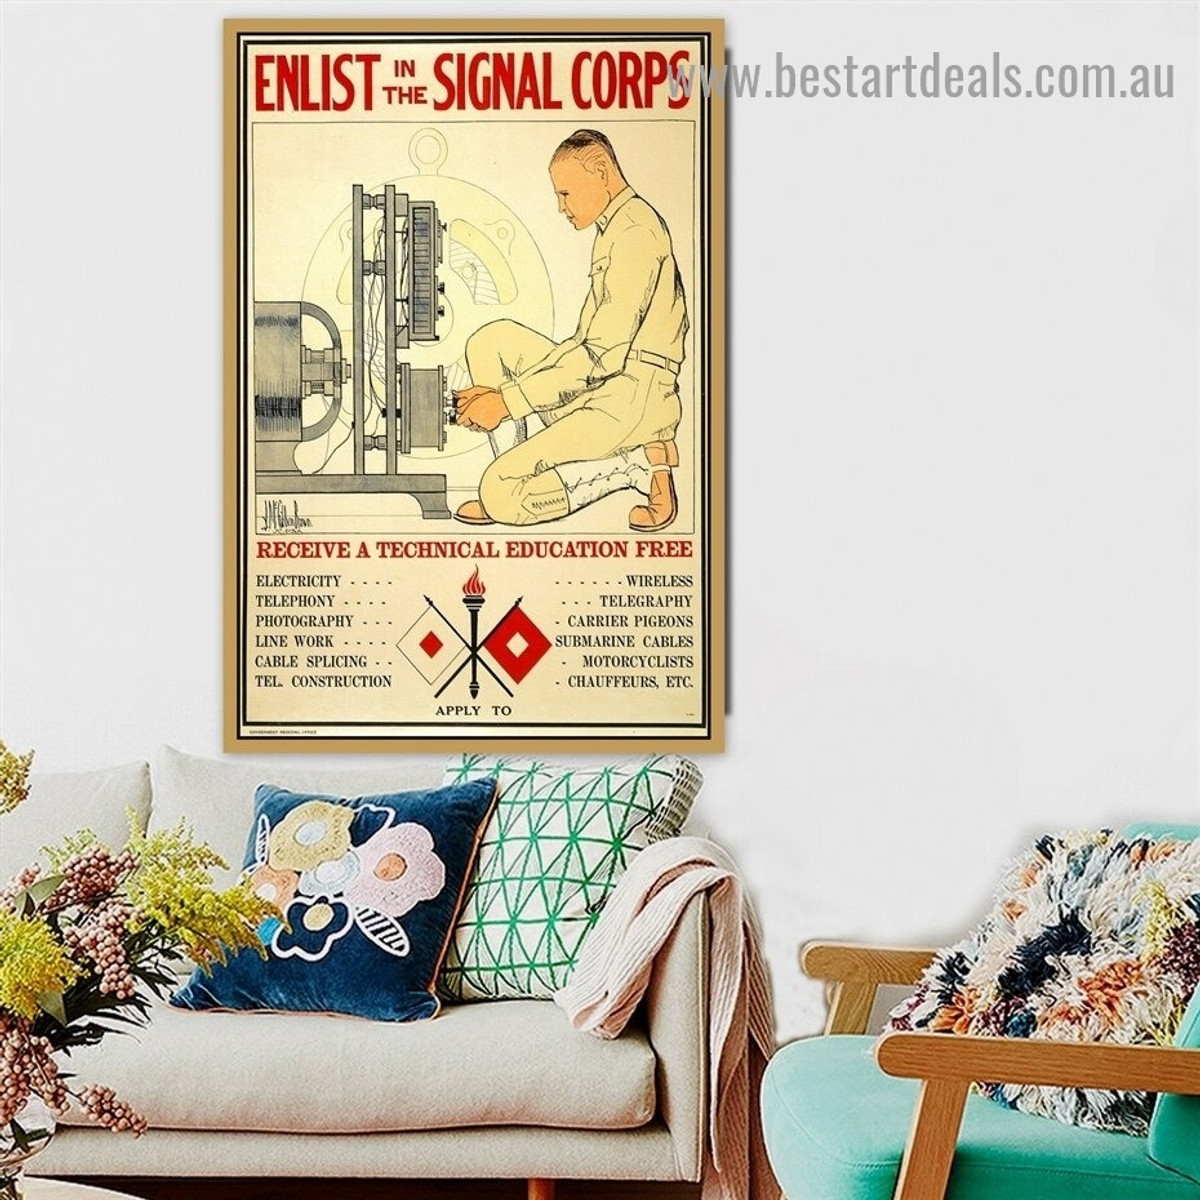 Enlist in the Signal Corps Figure Vintage Advertisement Poster Artwork Picture Canvas Print for Room Wall Ornament